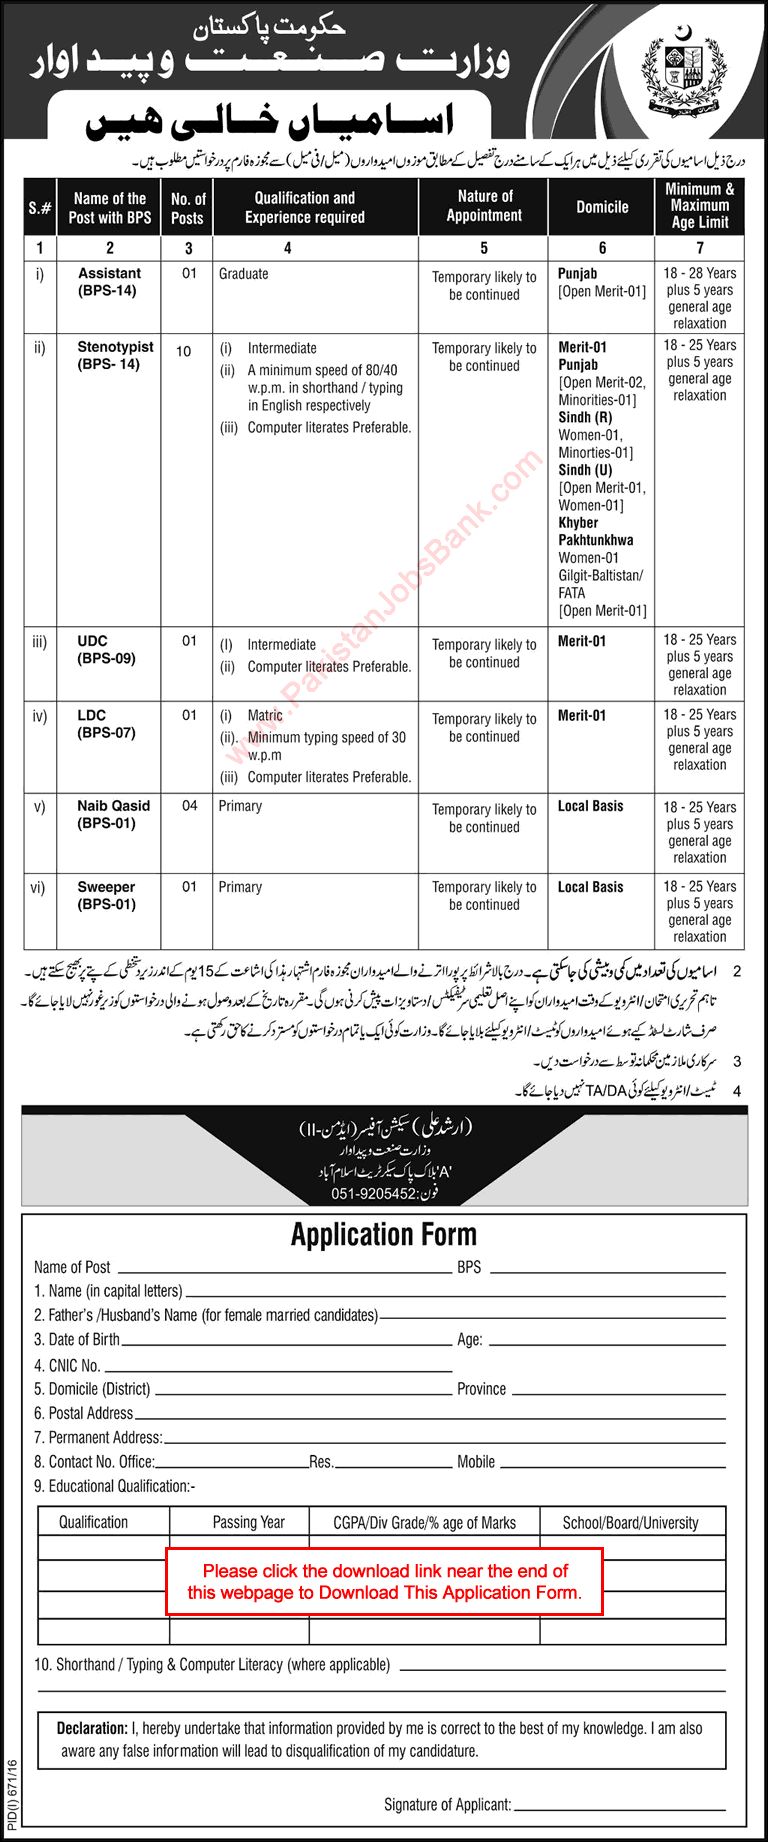 Ministry of Industries and Production Islamabad Jobs 2016 August Application Form Stenotypists, Naib Qasid & Others Latest